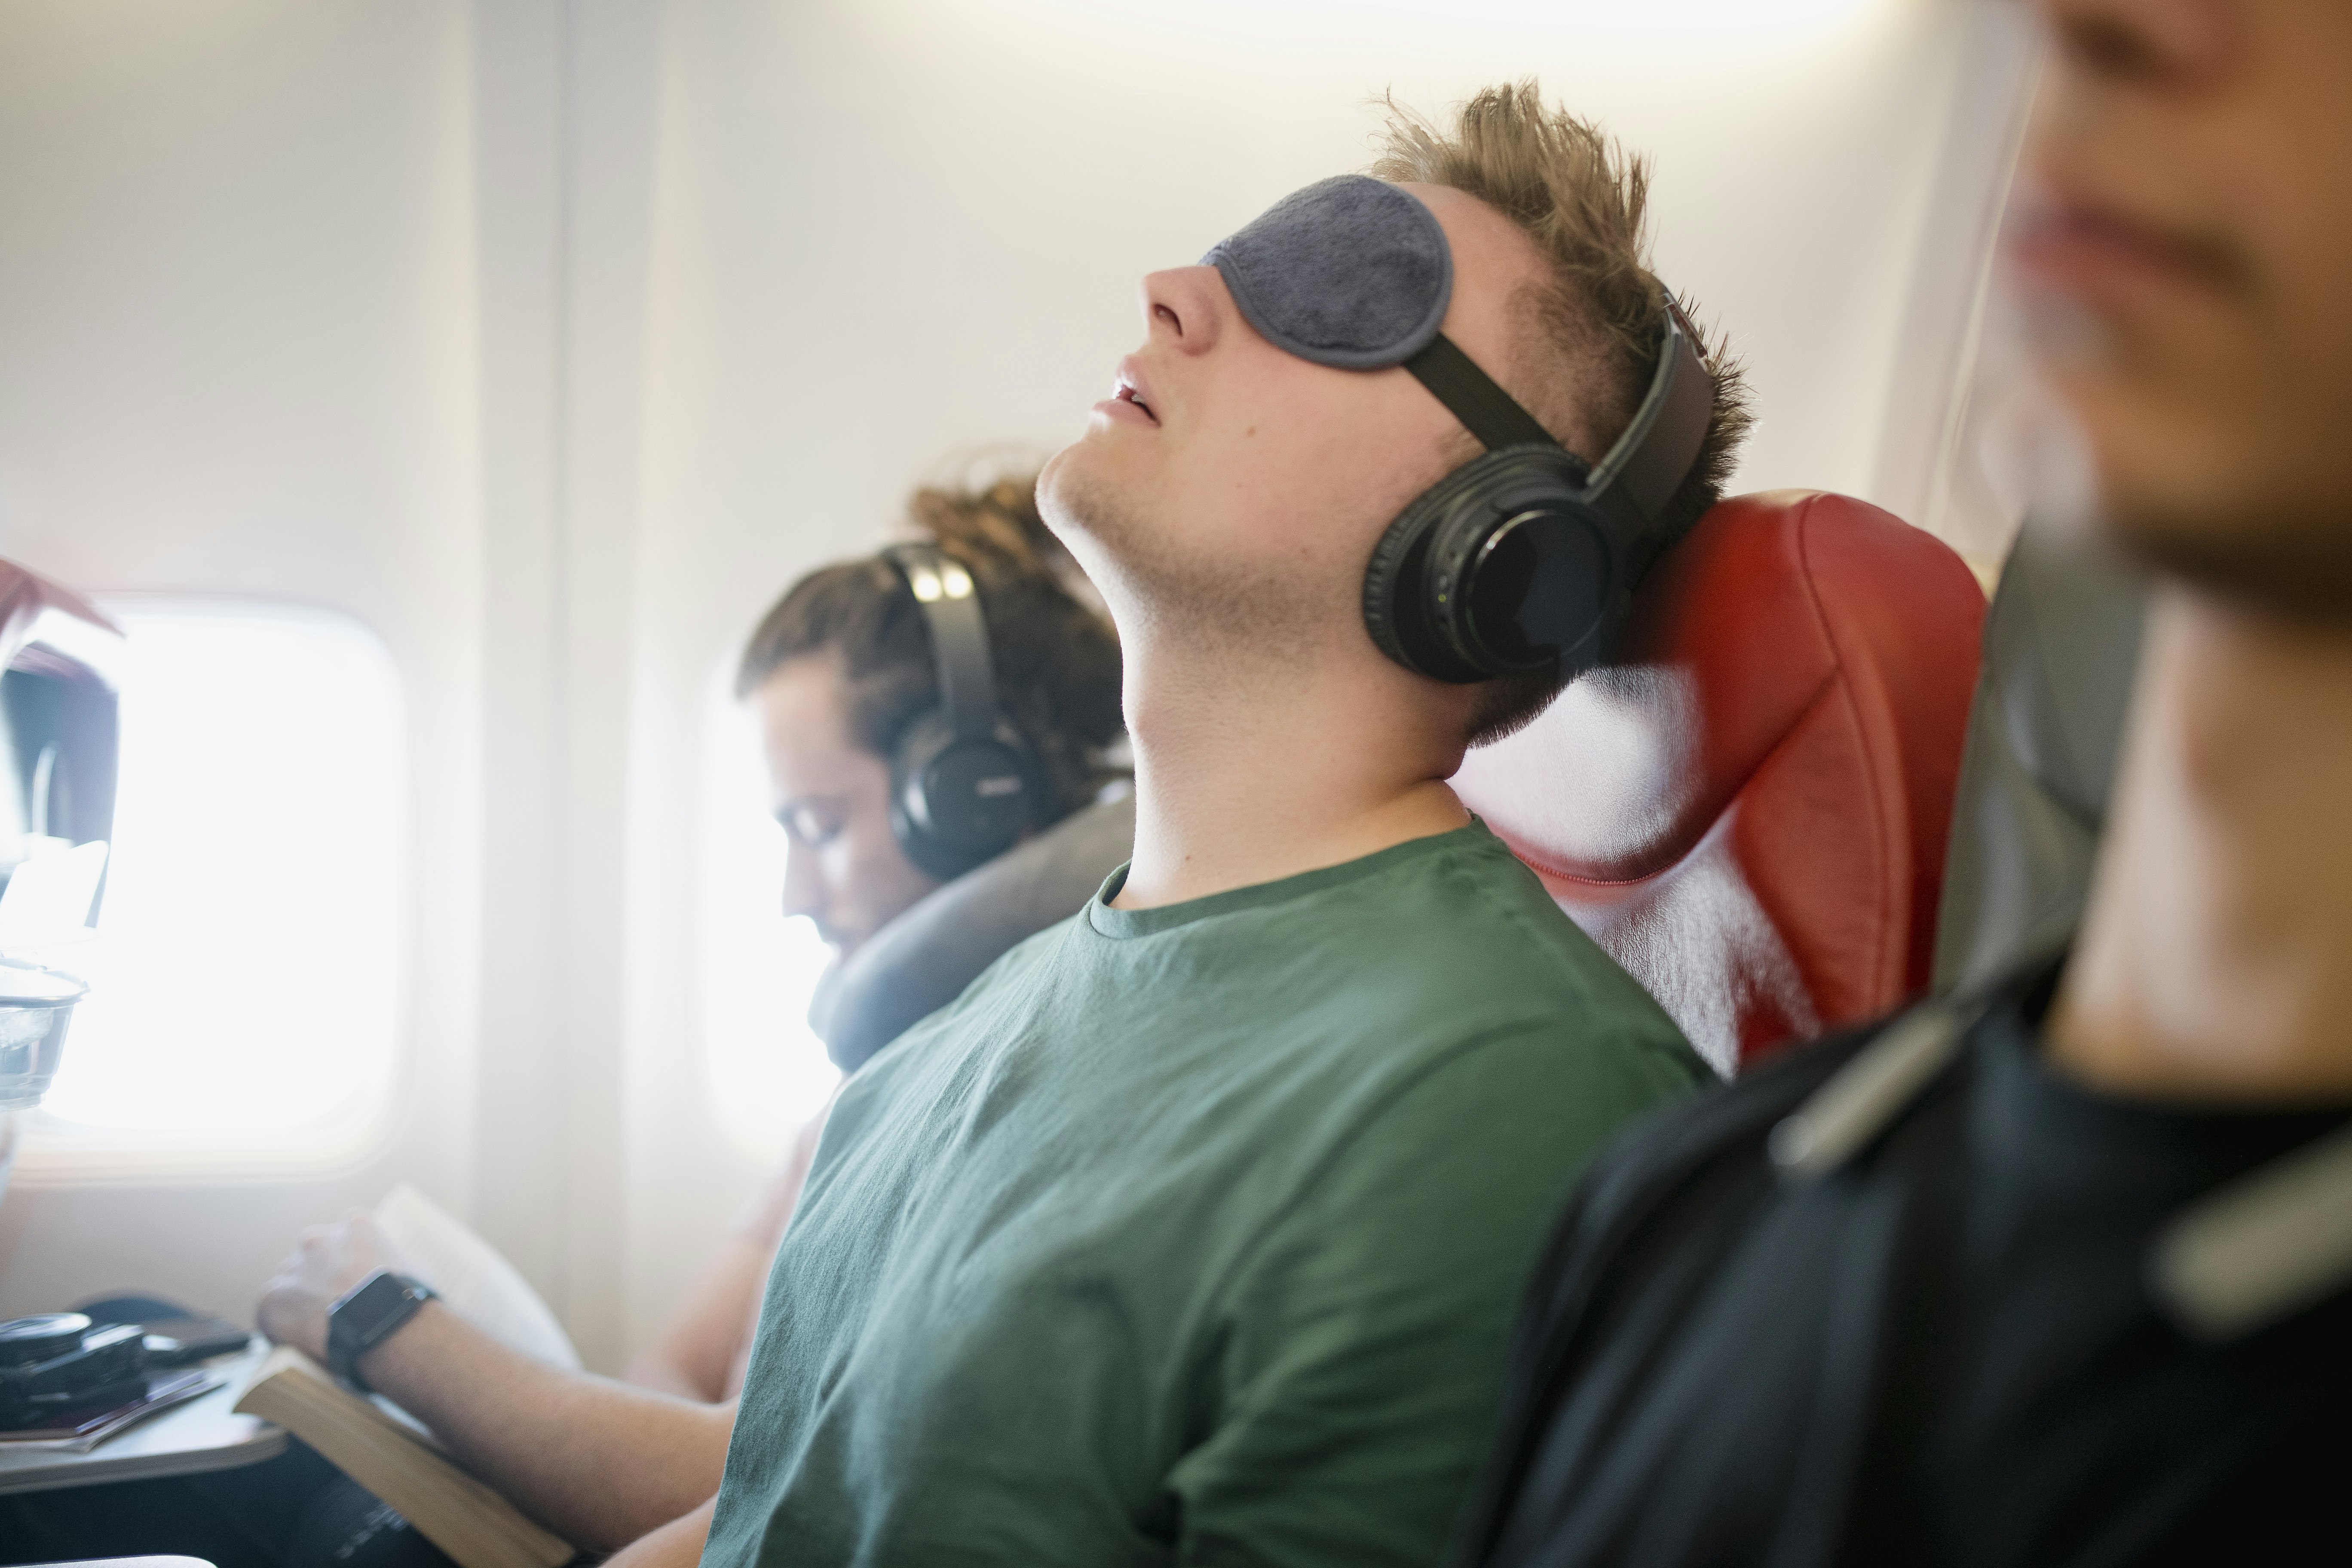 A man wearing a sleep mask and large headphones is sleeping on a plane while sitting in the middle seat.